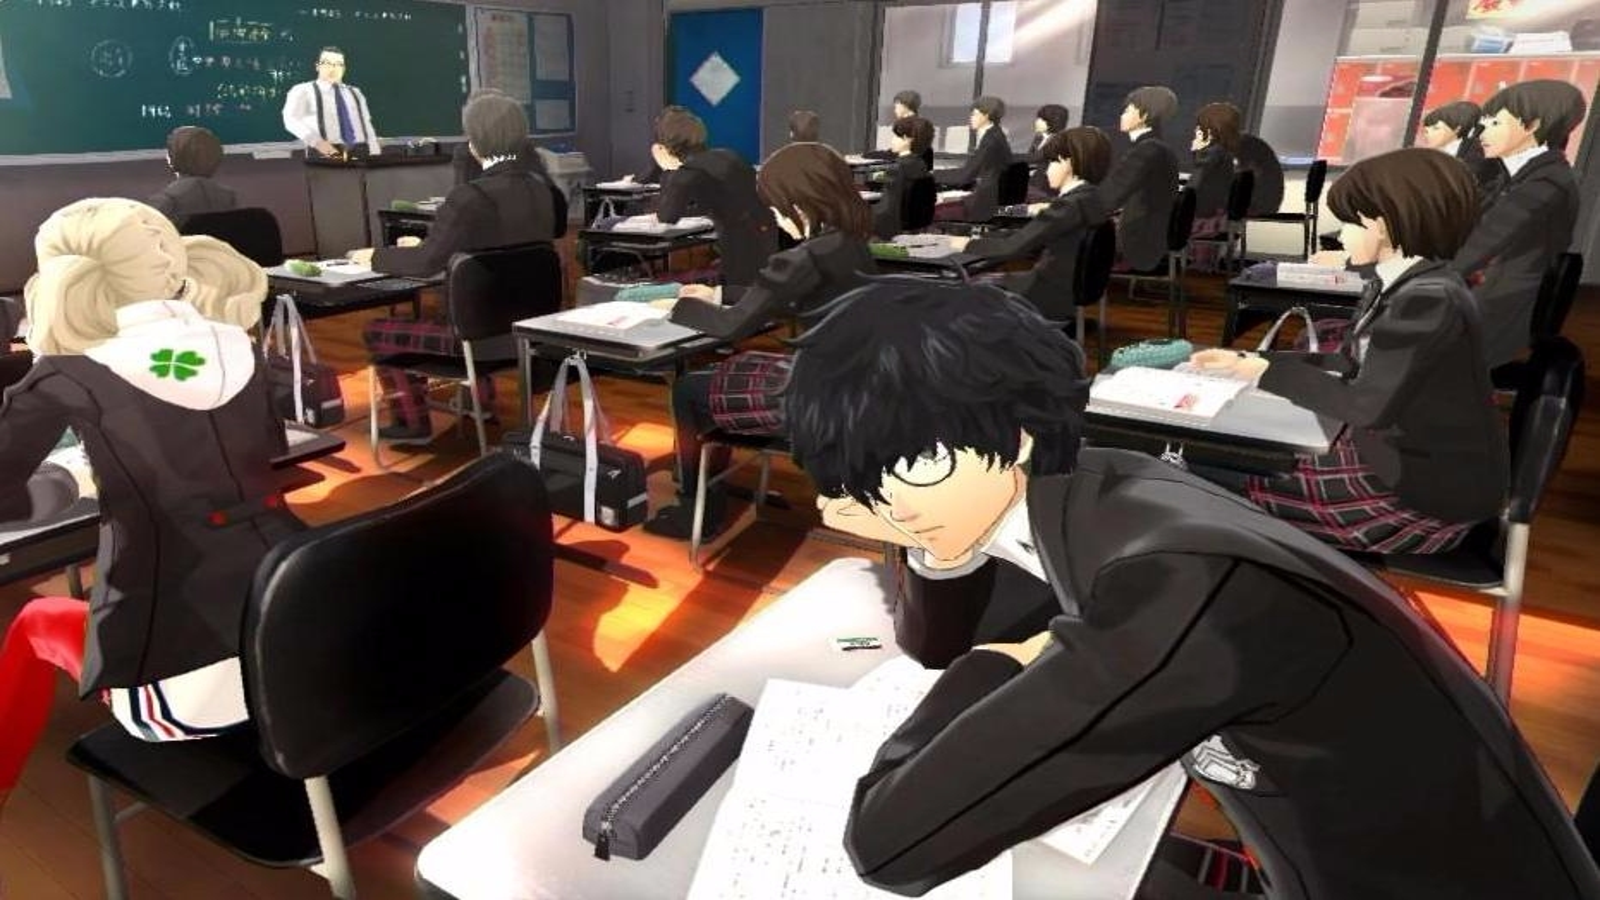 All classroom and test answers in Persona 5 Royal